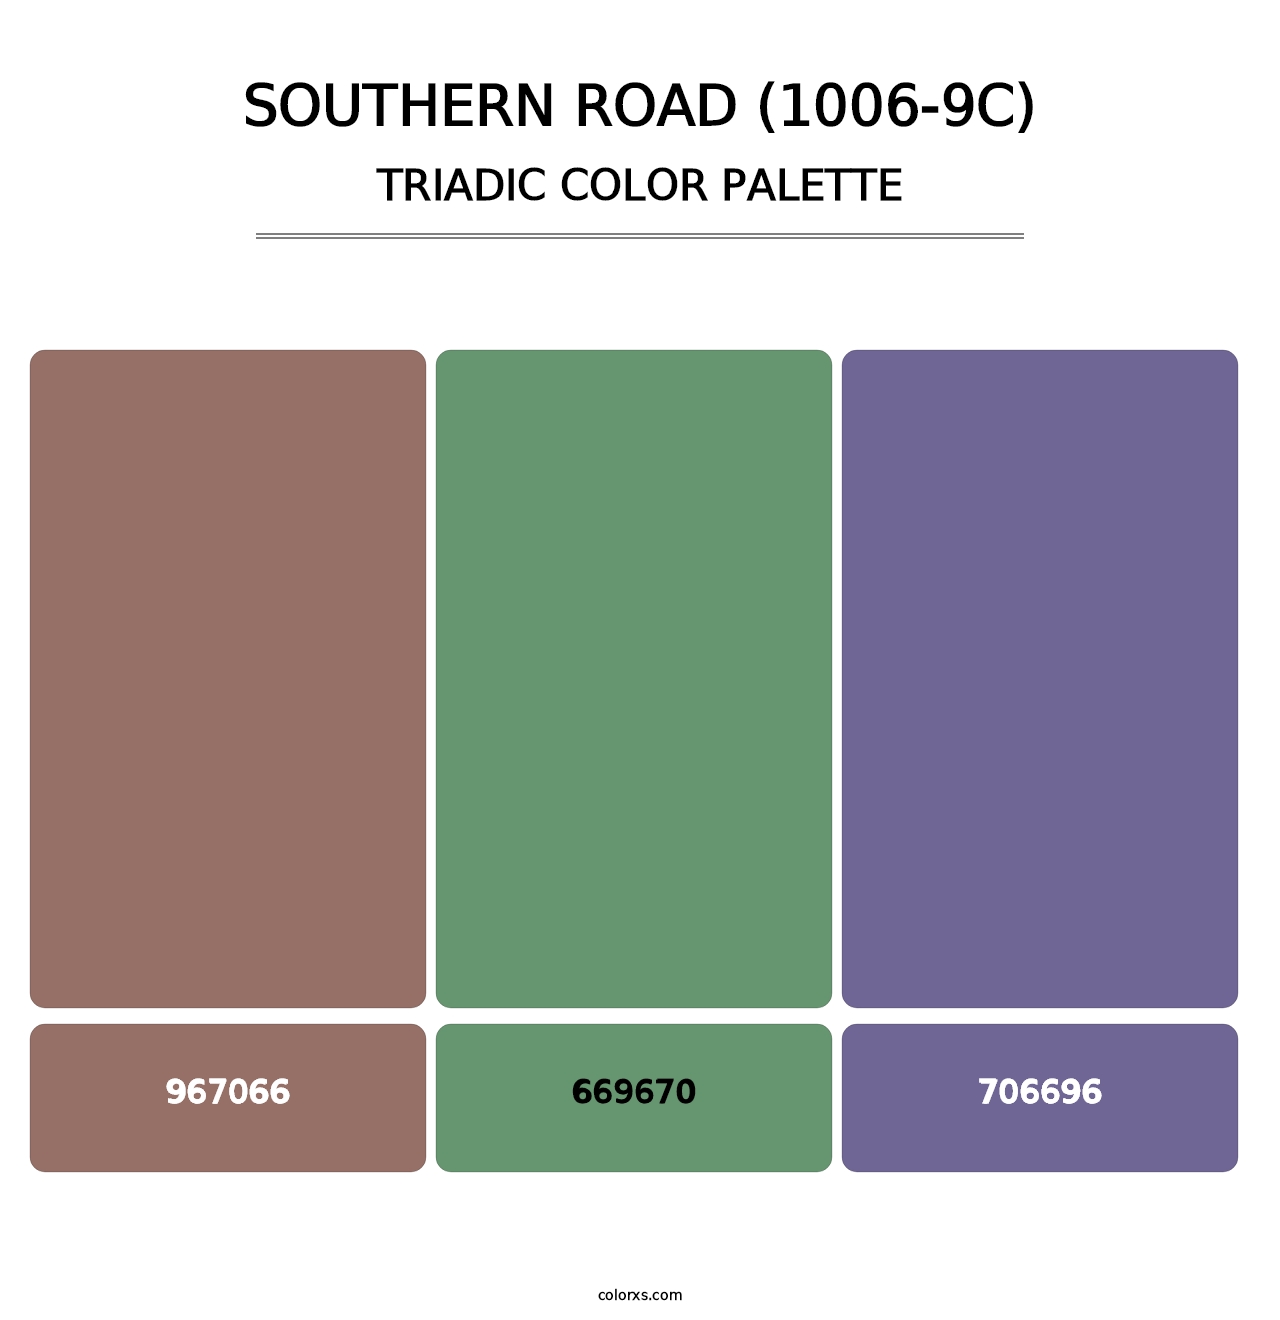 Southern Road (1006-9C) - Triadic Color Palette